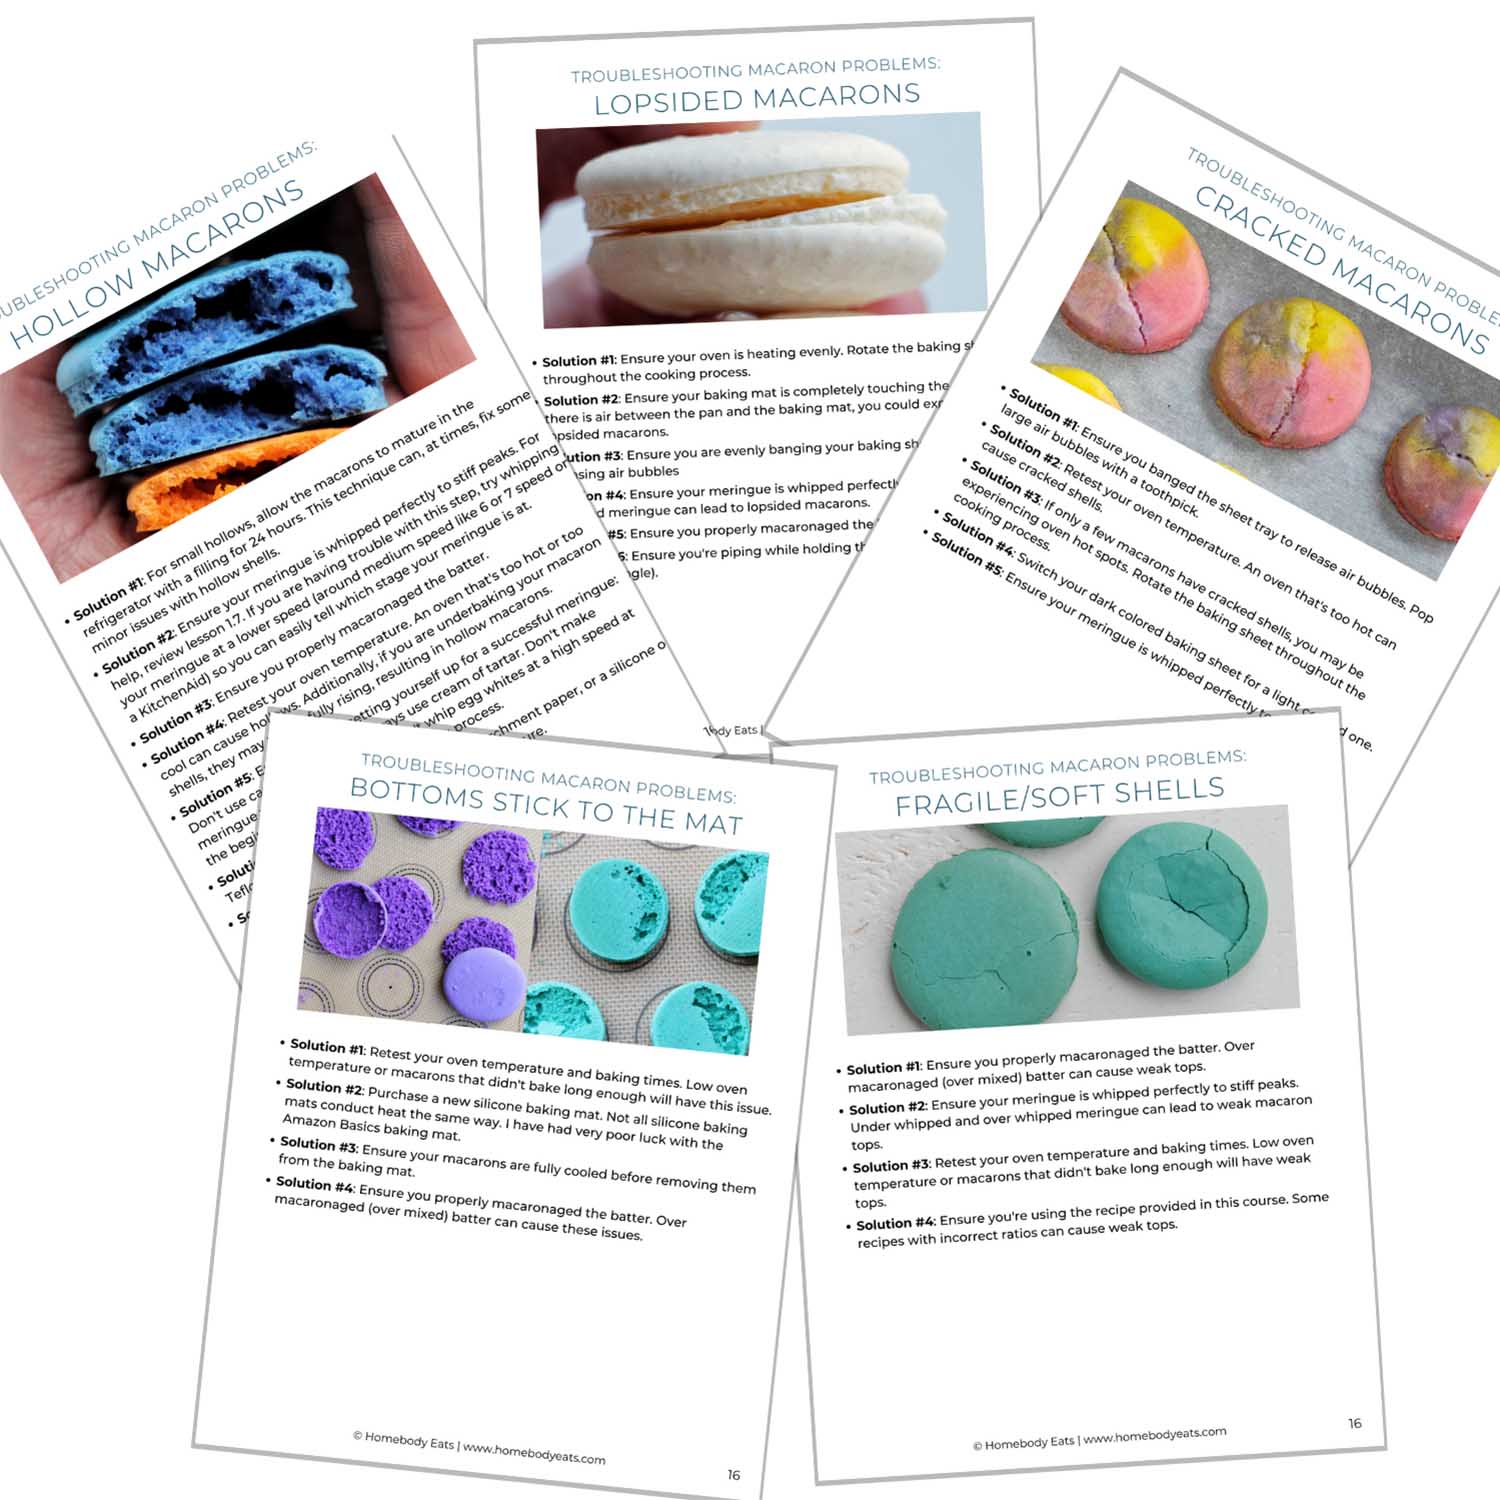 The Easter Macaron Fillings ebook pages on troubleshooting macarons.